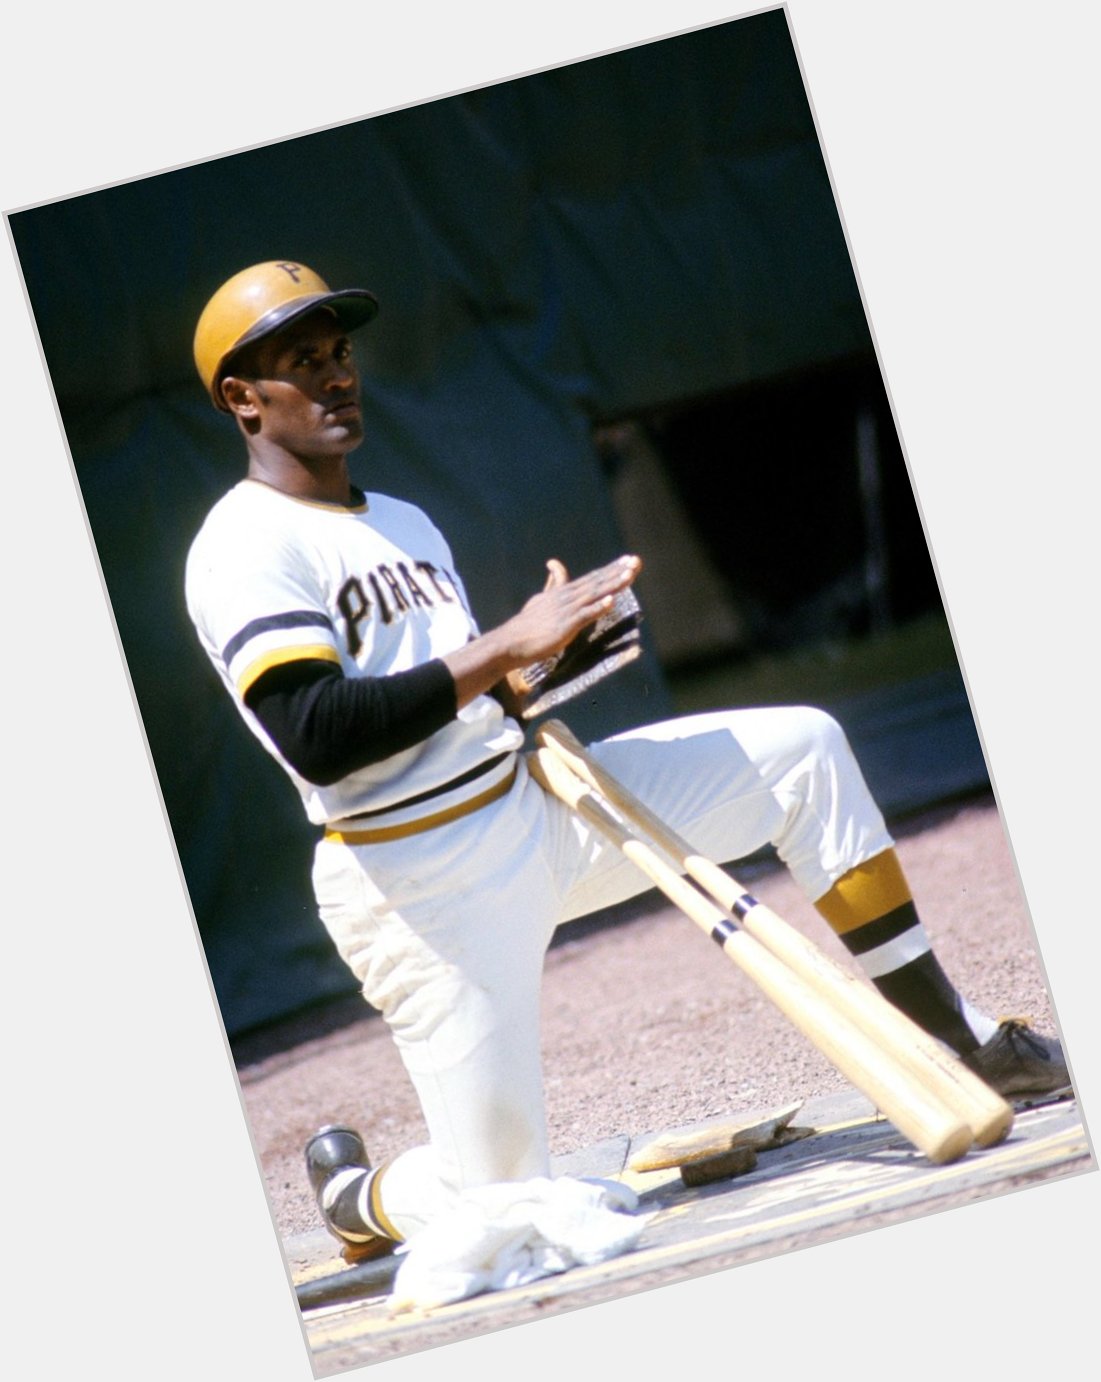 Happy Birthday to the legend Roberto Clemente. REmessage to wish a happy 83rd birthday. 